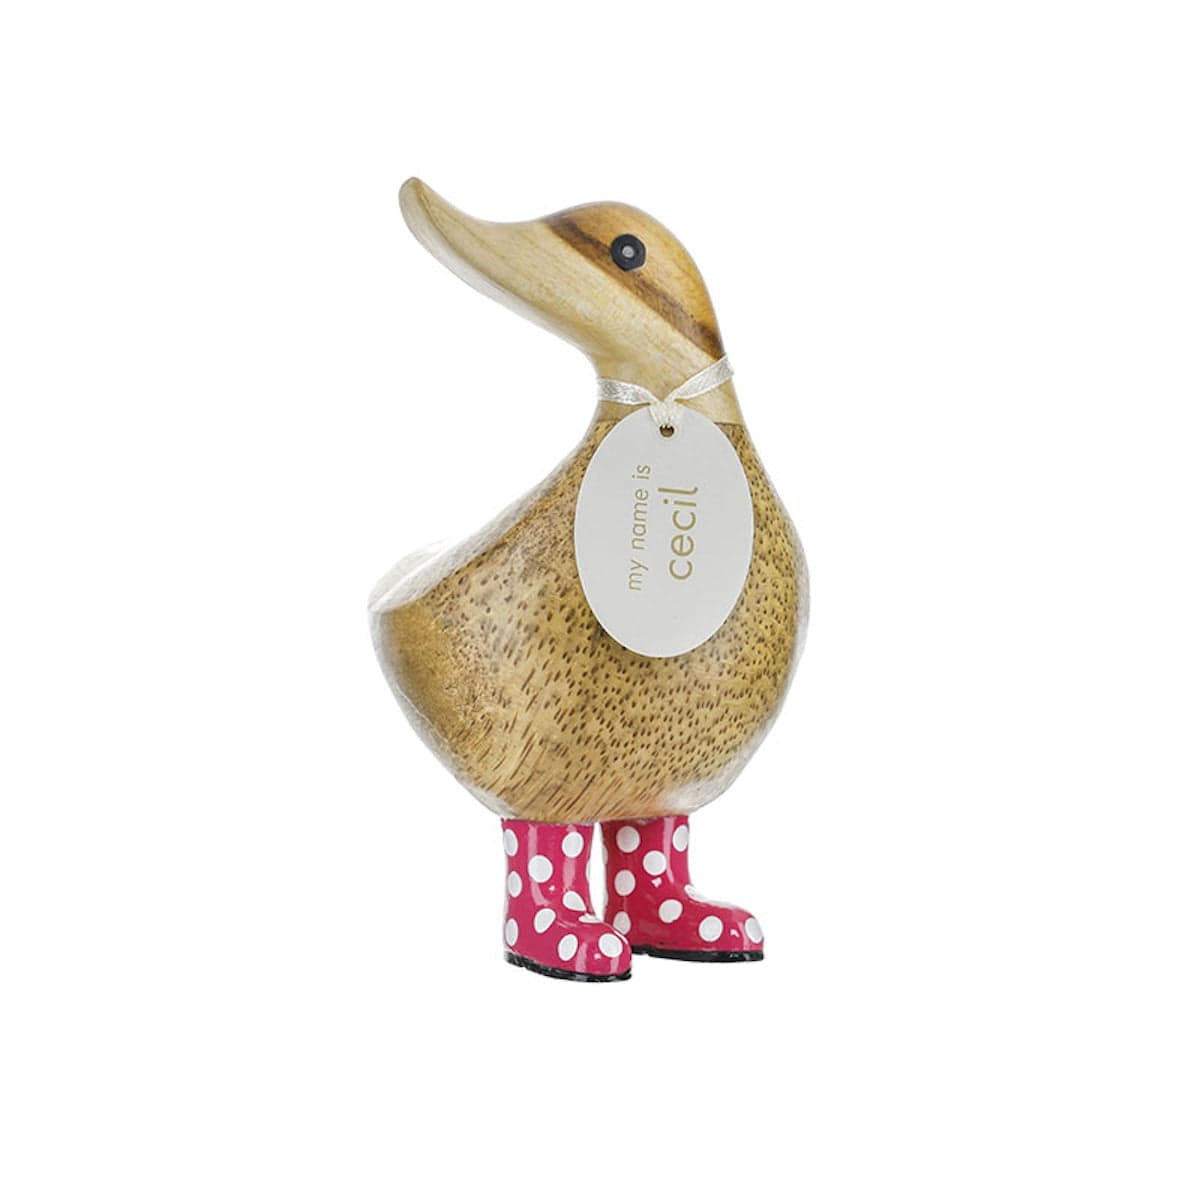 DCUK Ornaments Pink Spotty Welly Small Wooden Ducky - Choice of Colour